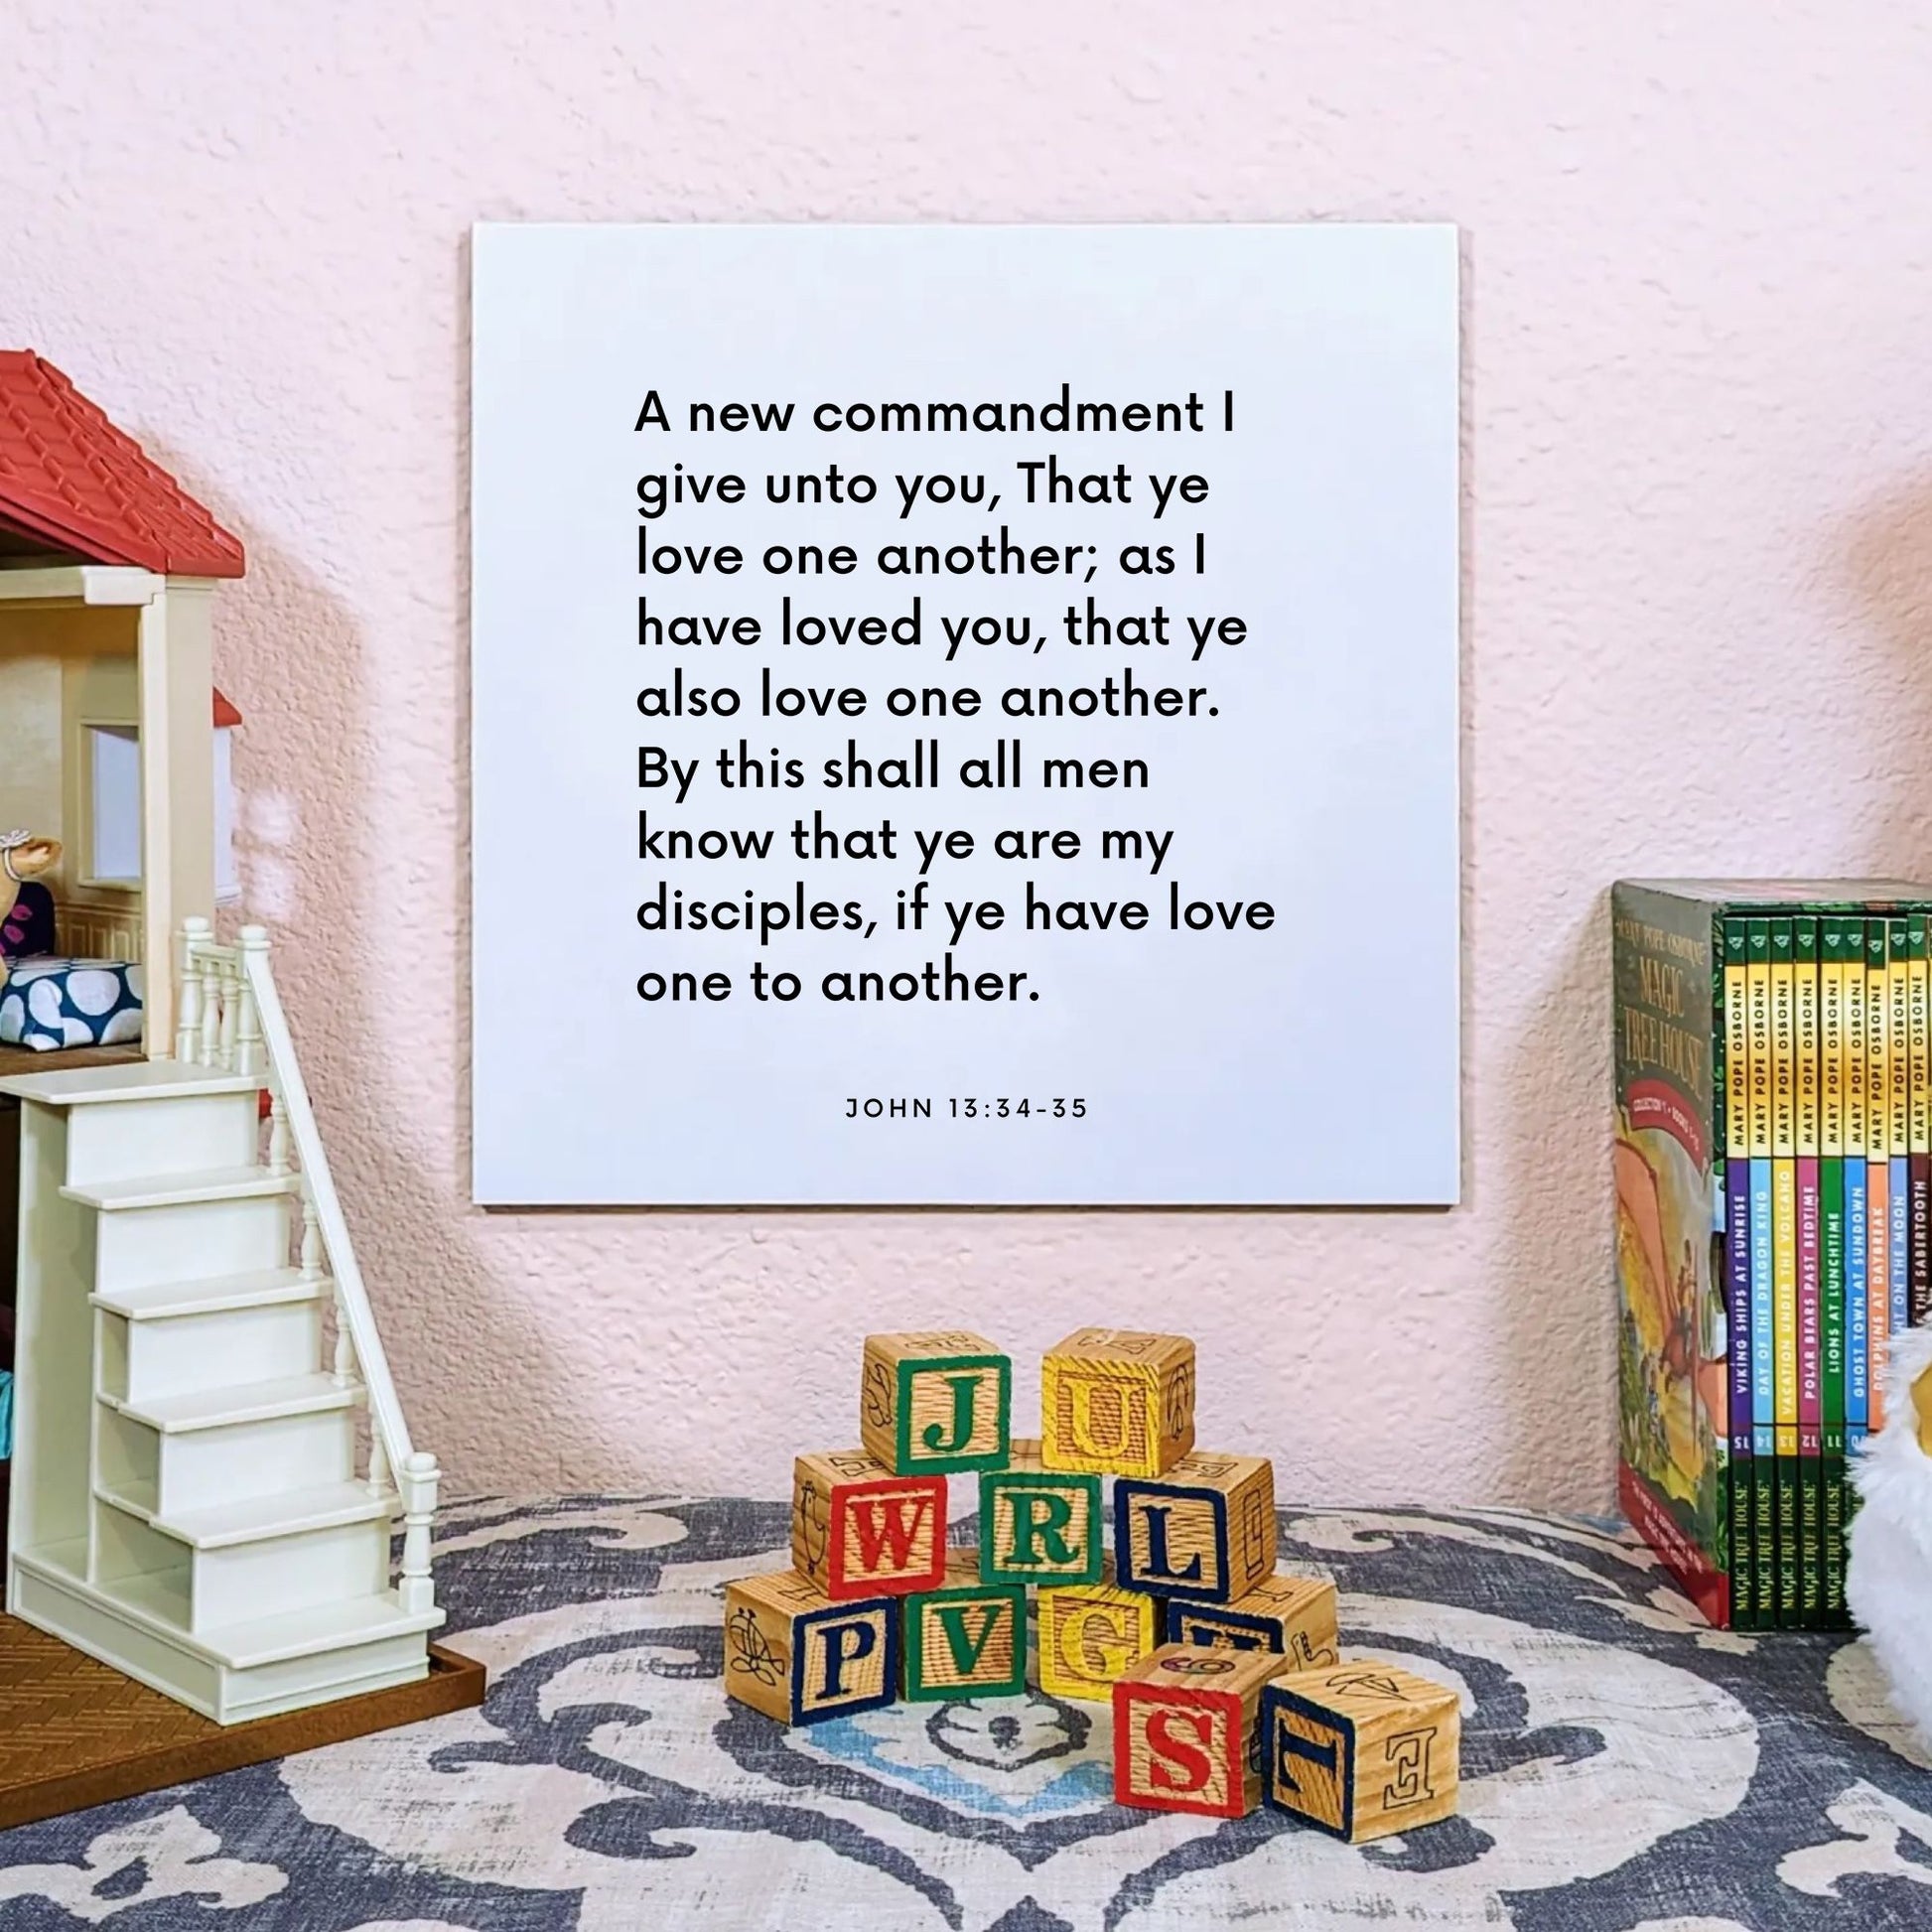 Playroom mouting of the scripture tile for John 13:34-35 - "A new commandment I give unto you, That ye love one another"